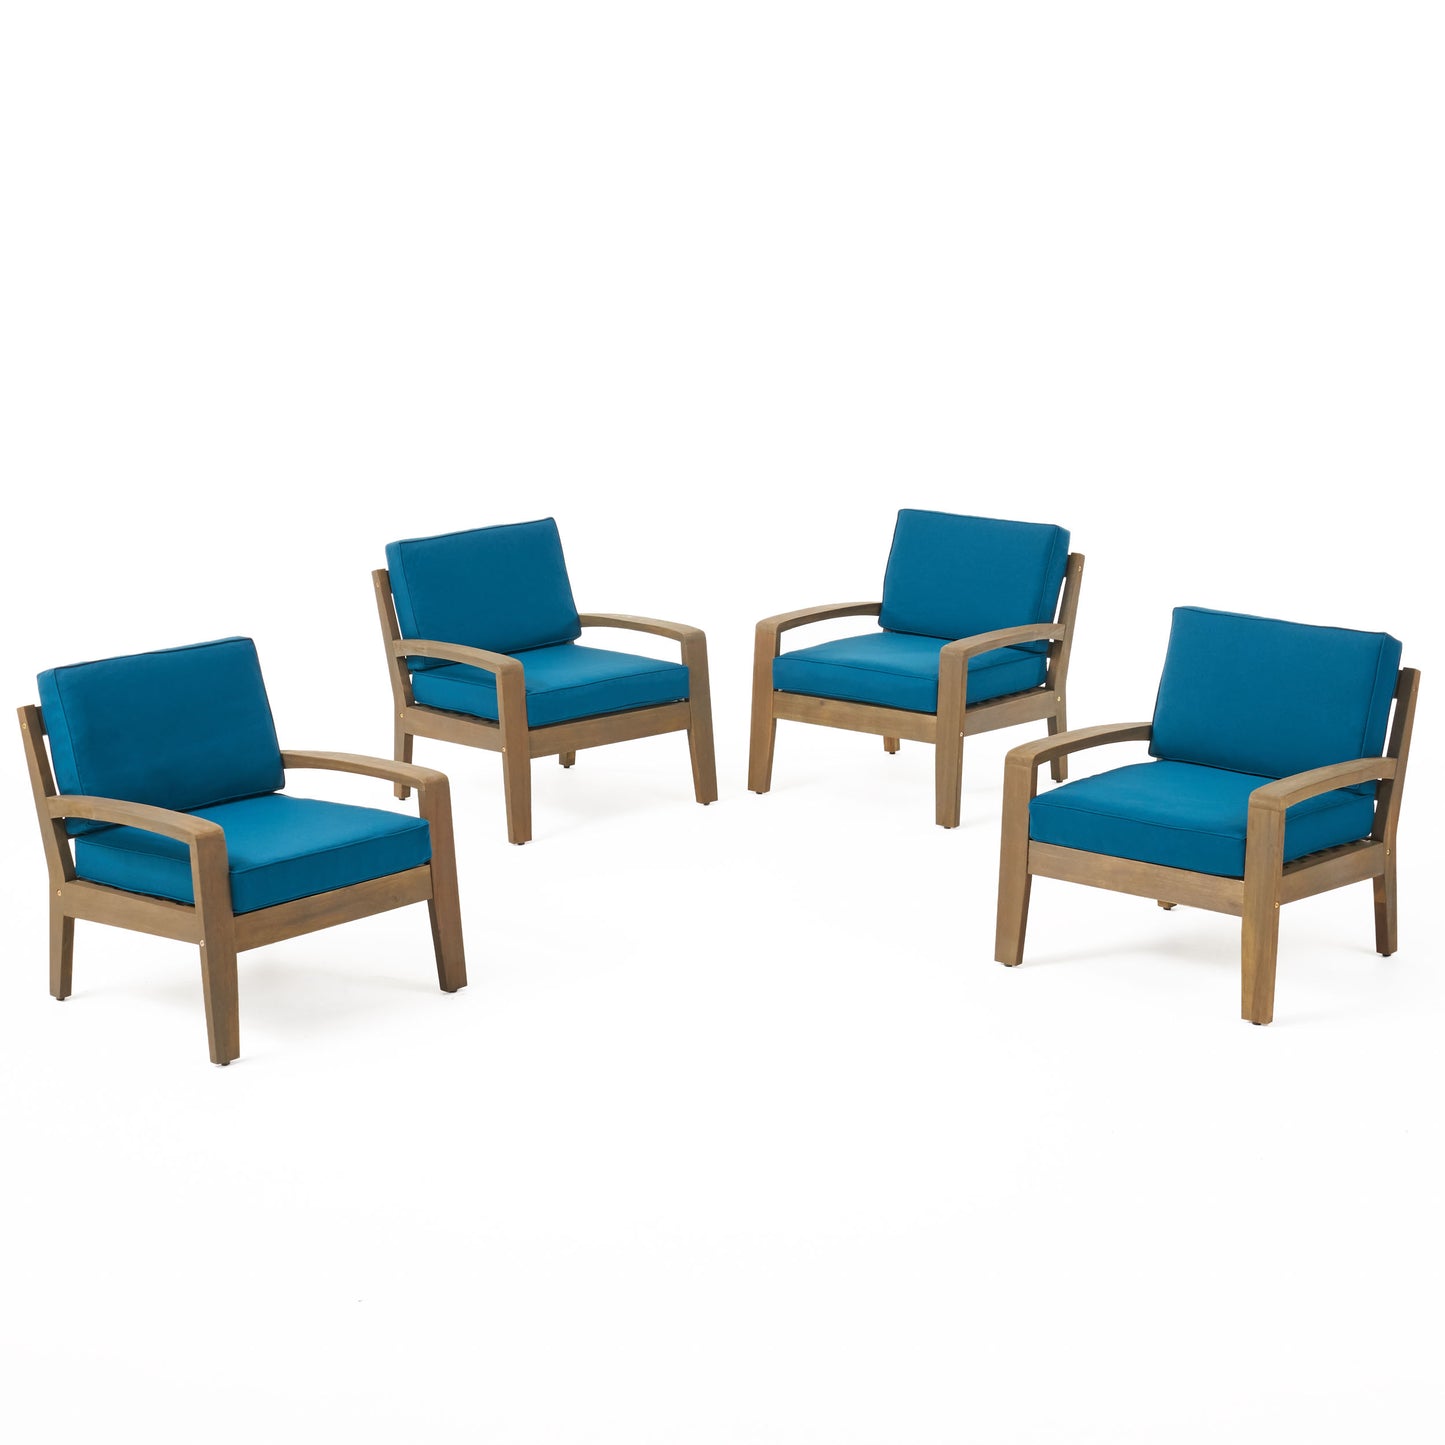 Parma Outdoor Acacia Wood Club Chairs with Cushions (Set of 4)